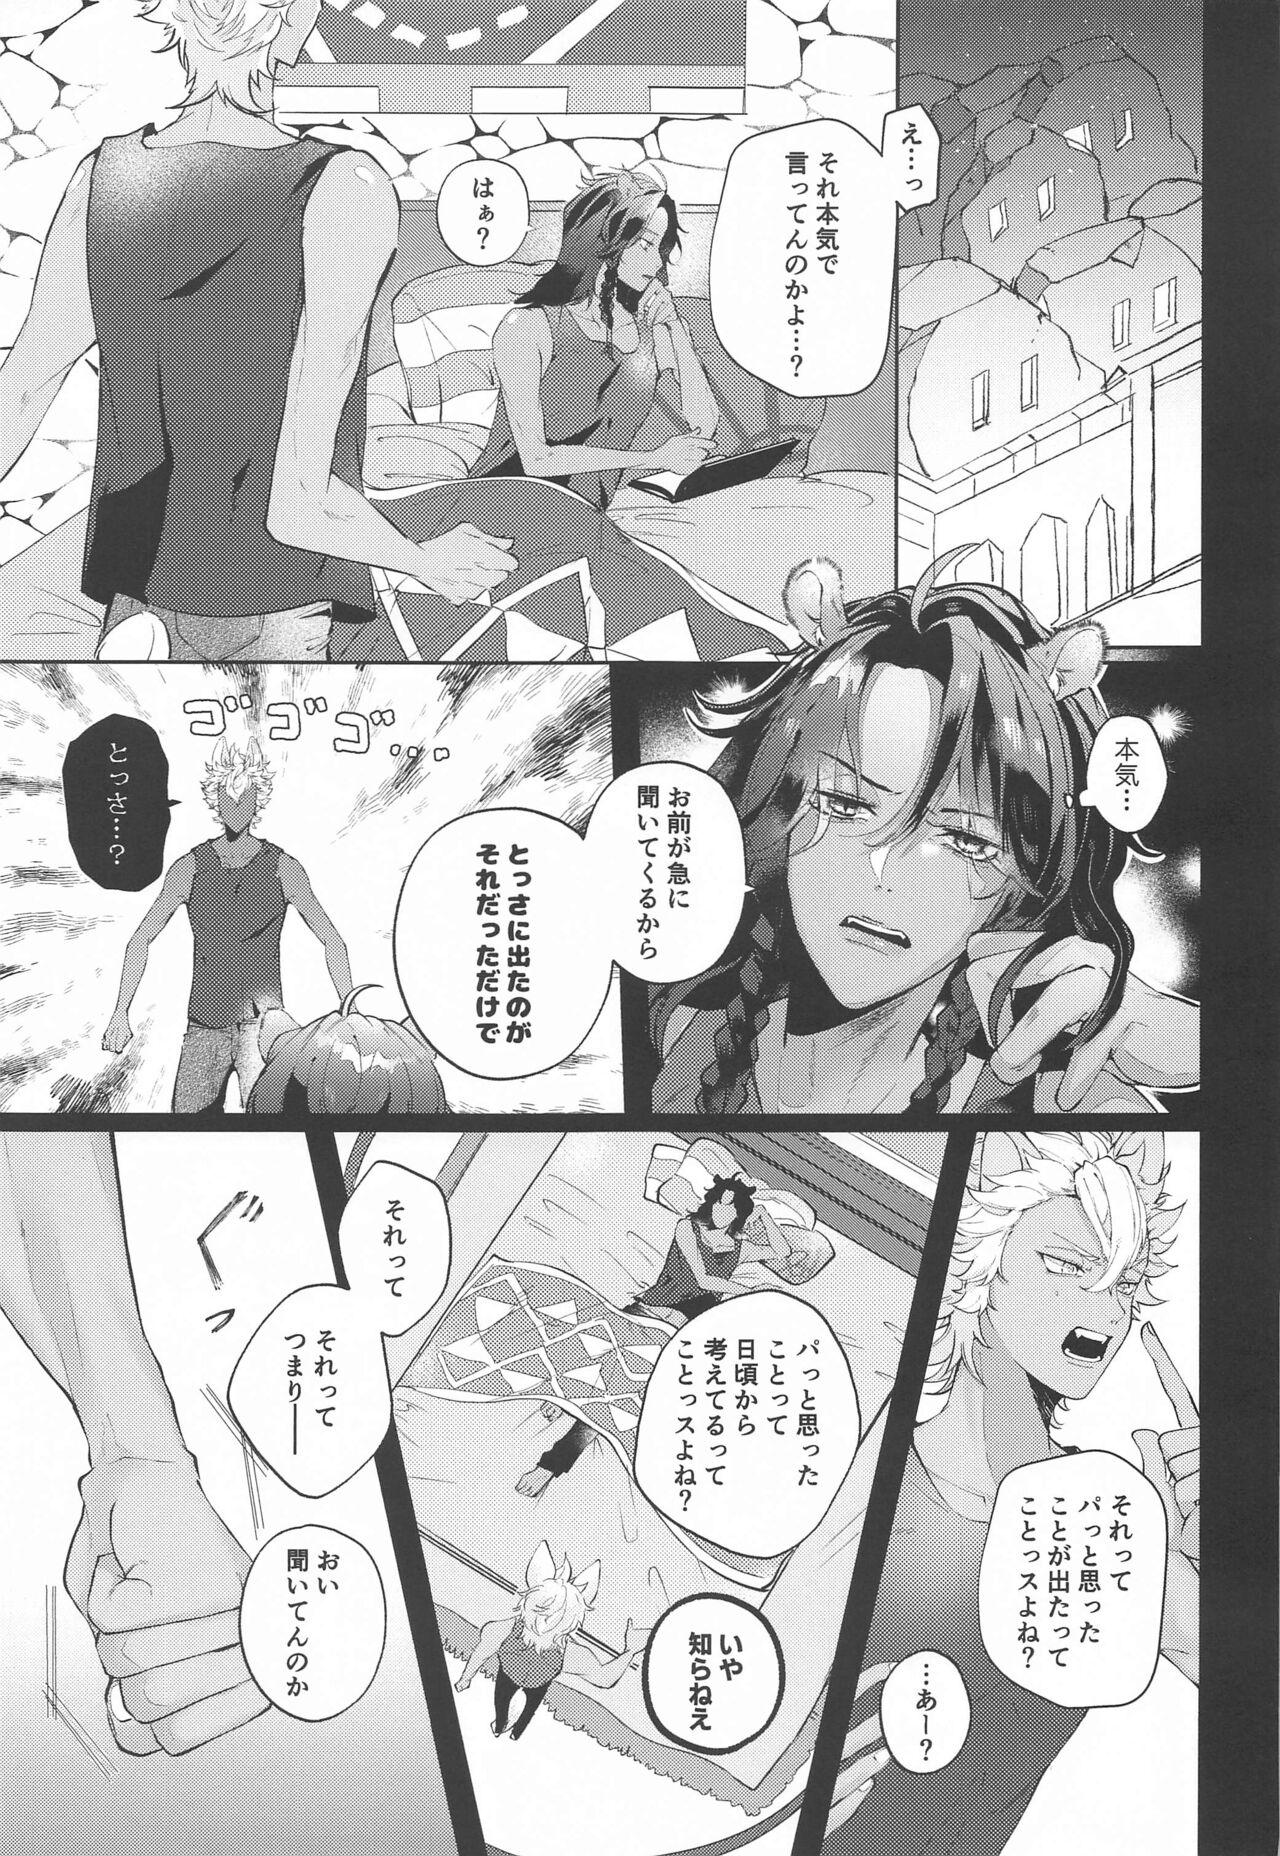 Gorgeous Kanchigai Over Run!! - over run from a misunderstanding - Disney twisted-wonderland Fisting - Page 2